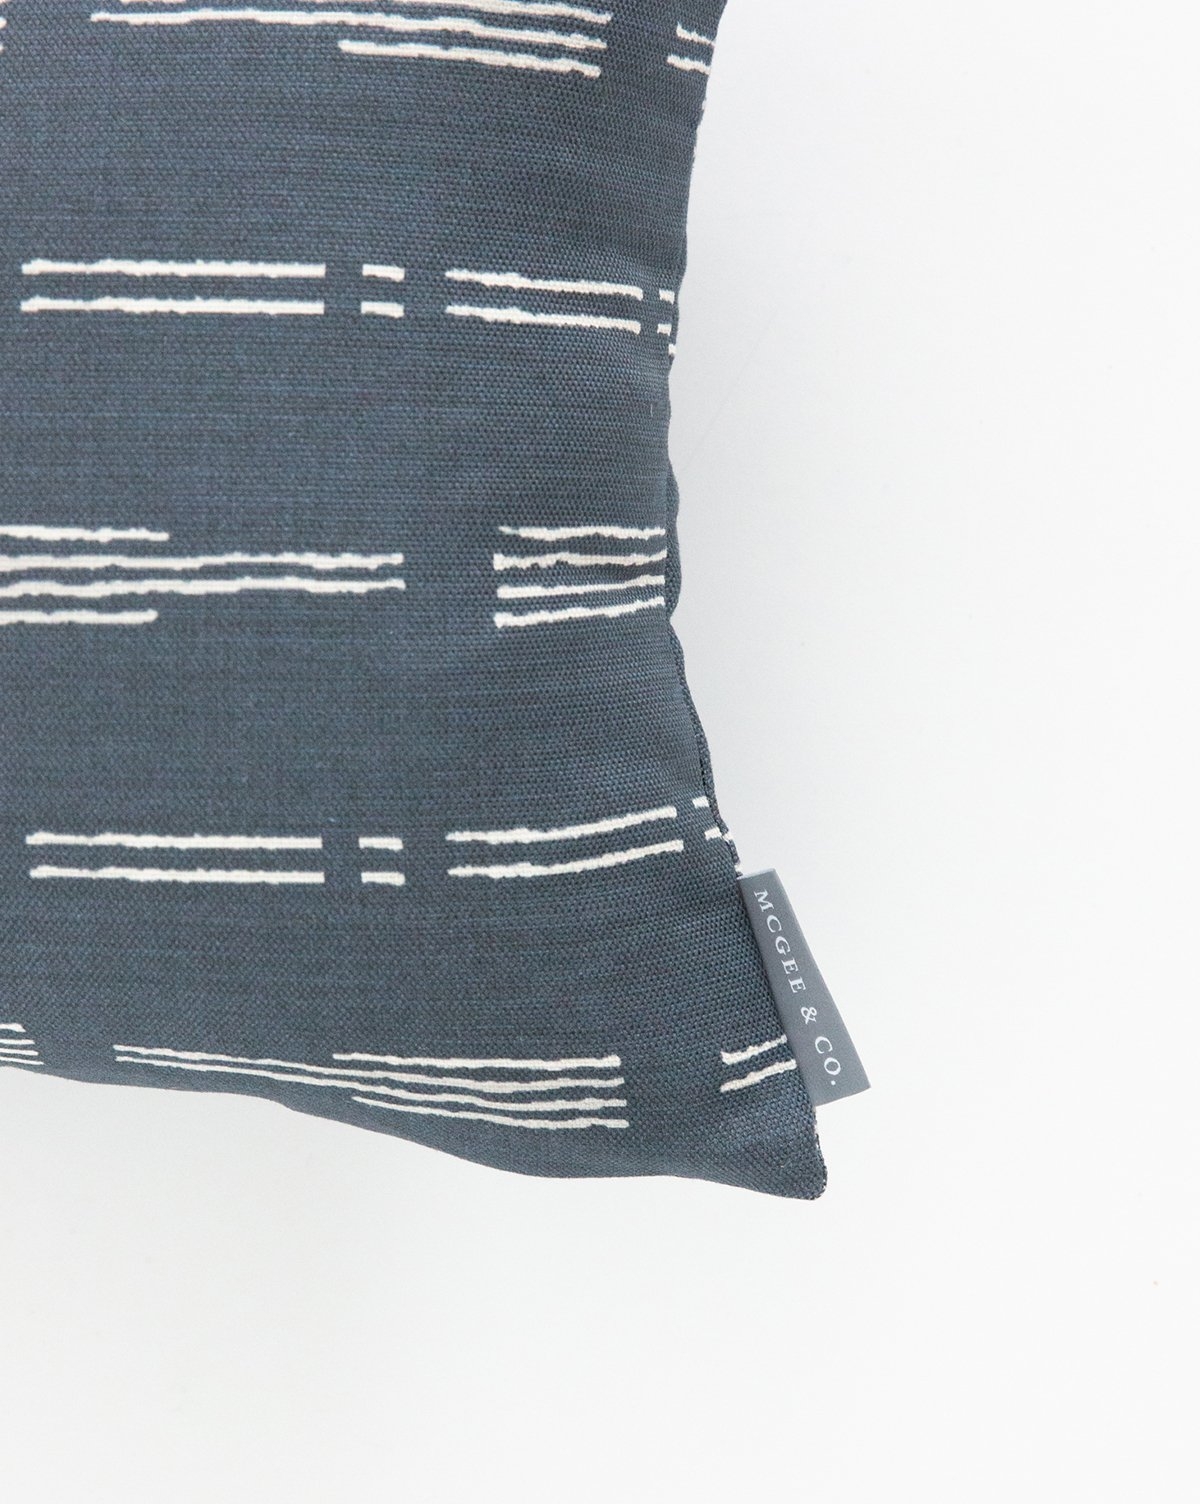 NIK BROKEN STRIPE PILLOW COVER WITHOUT INSERT, NAVY, 14" x 20" - Image 1